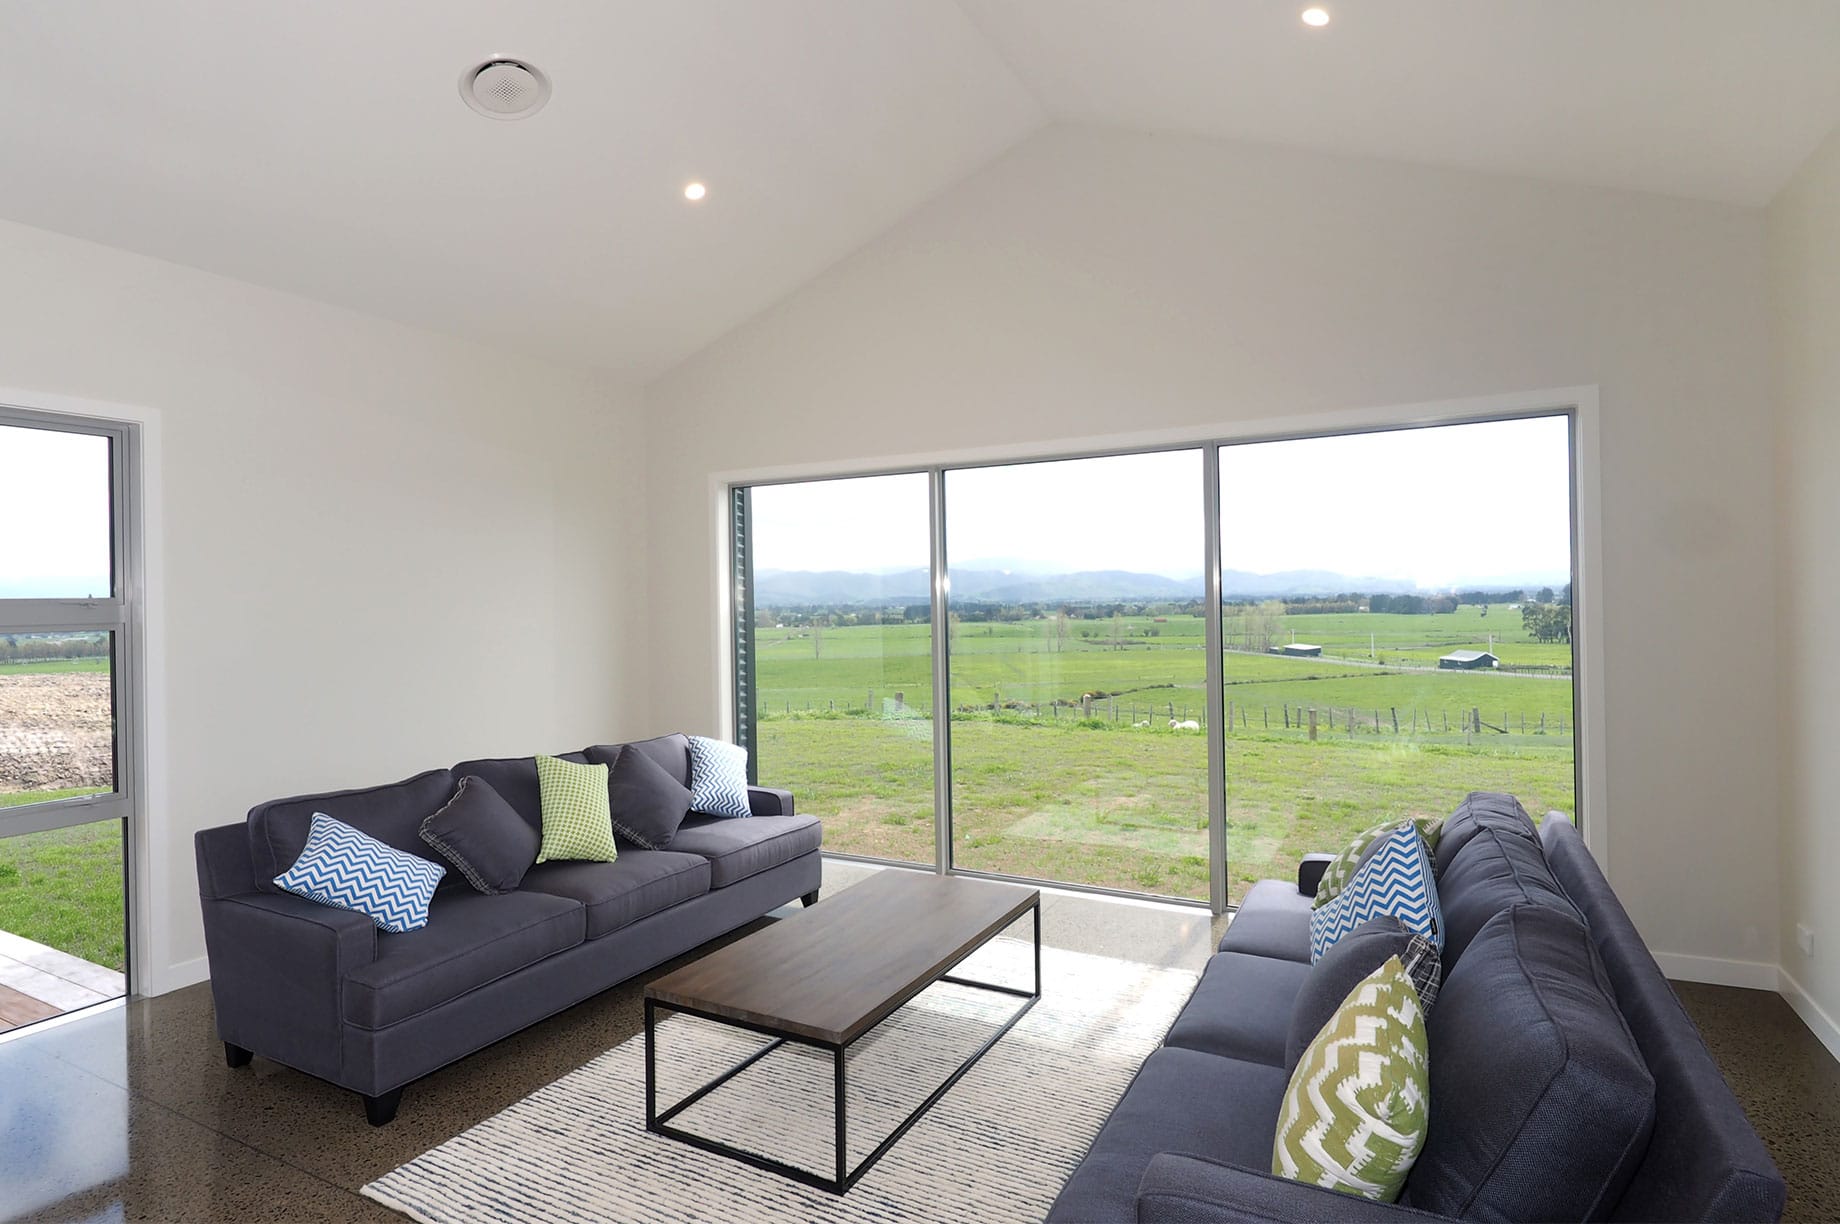 Lounge room with a view of farmland